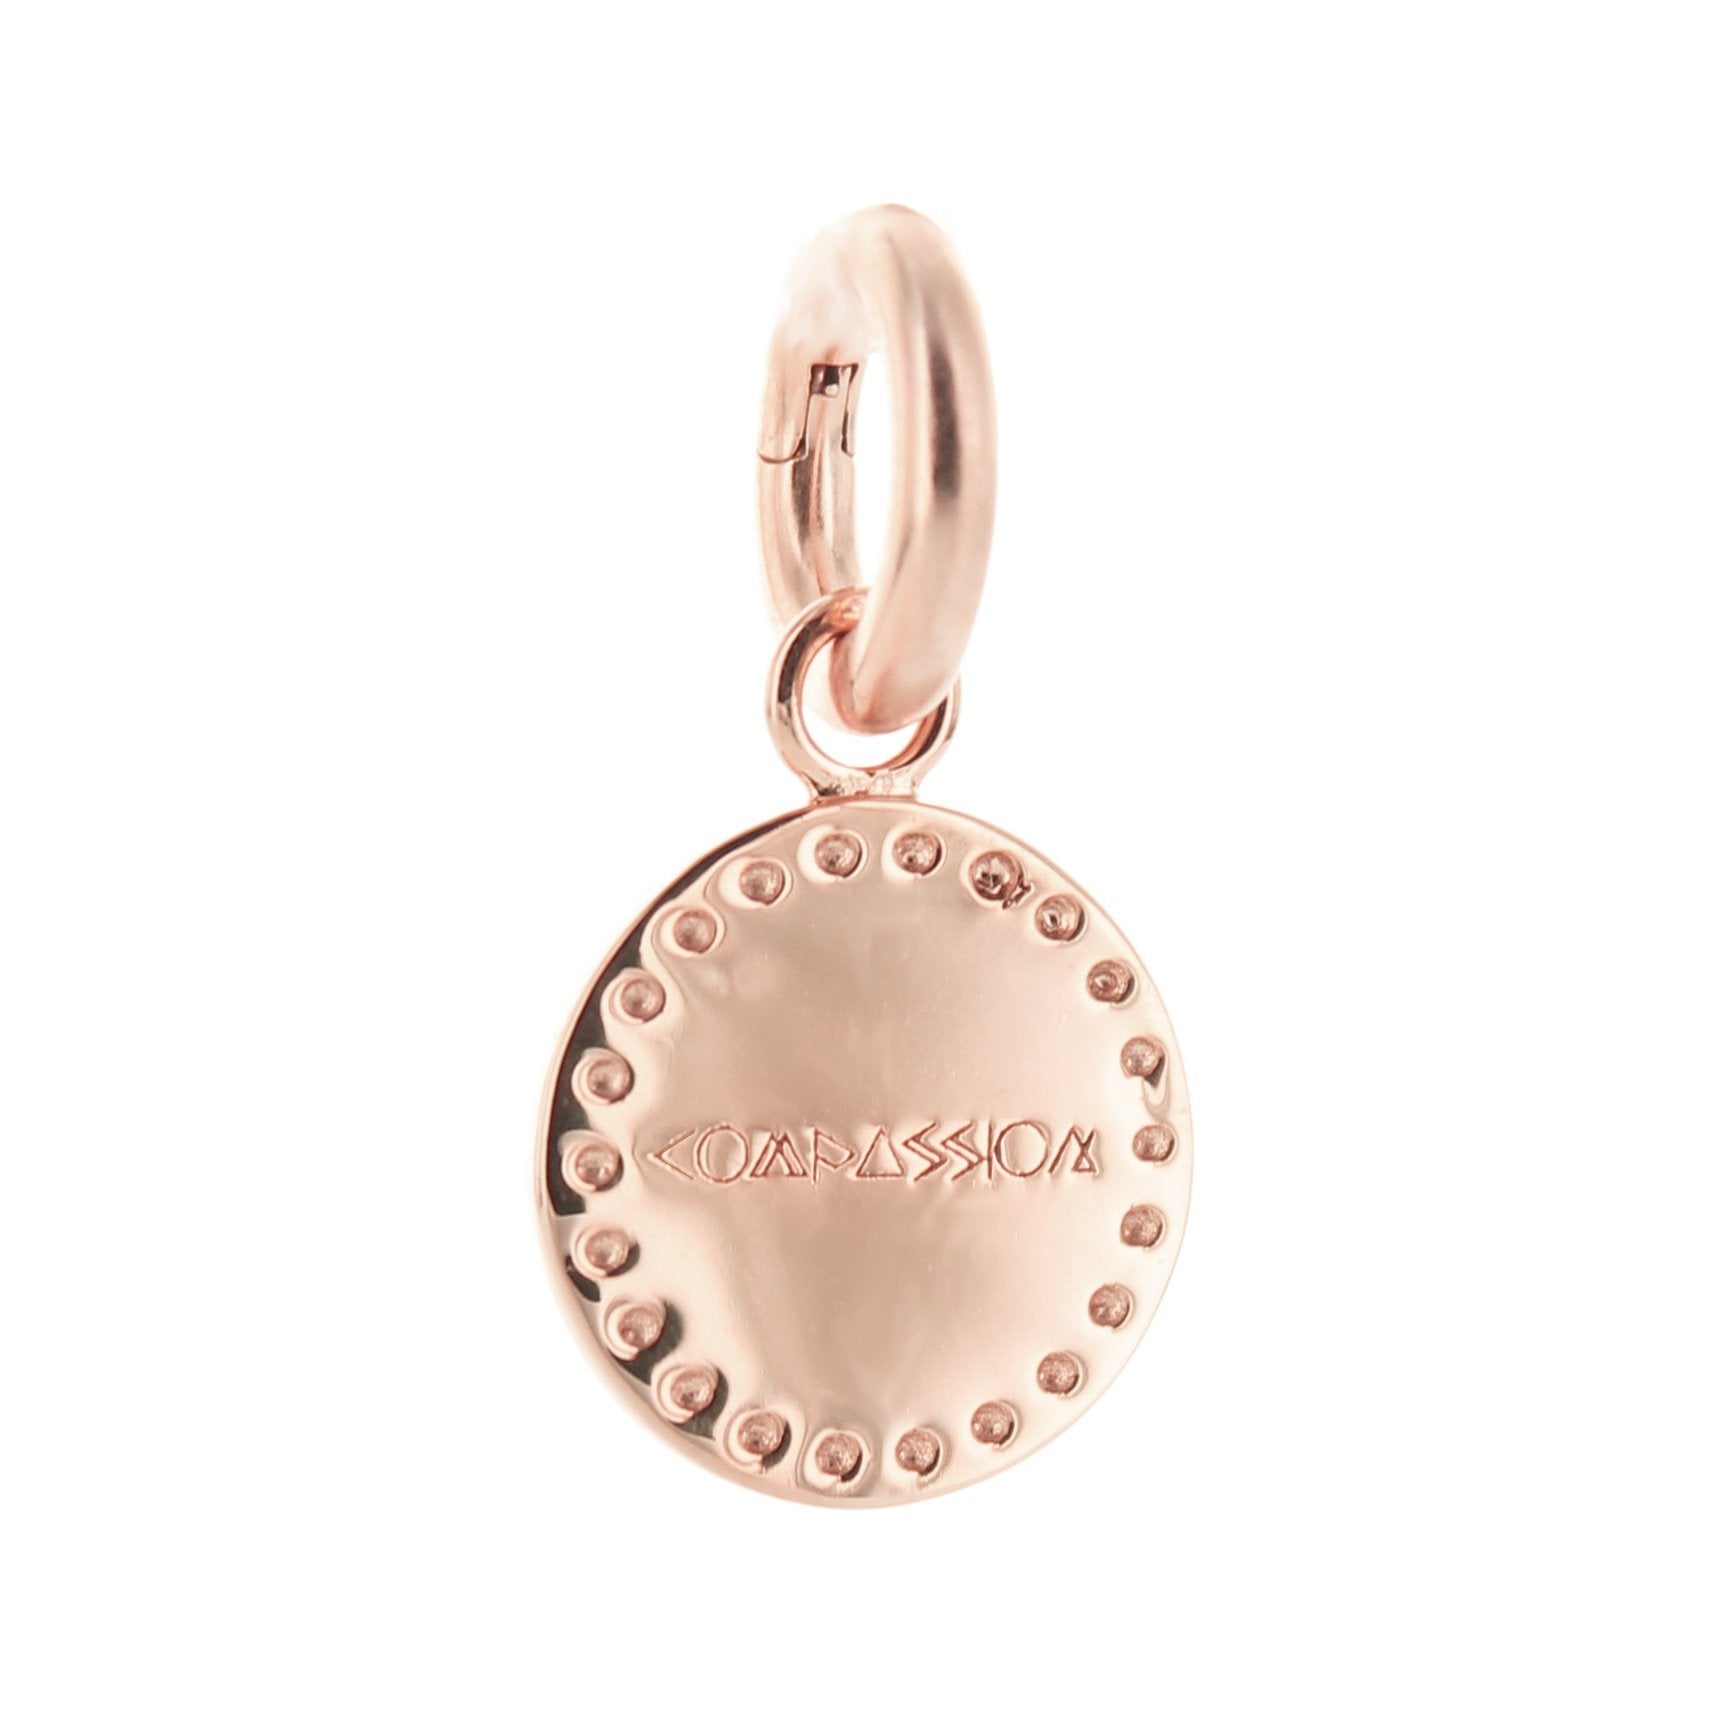 COMPASSION FLOATING CHARM PENDANT ALL METAL ROSE GOLD - SO PRETTY CARA COTTER